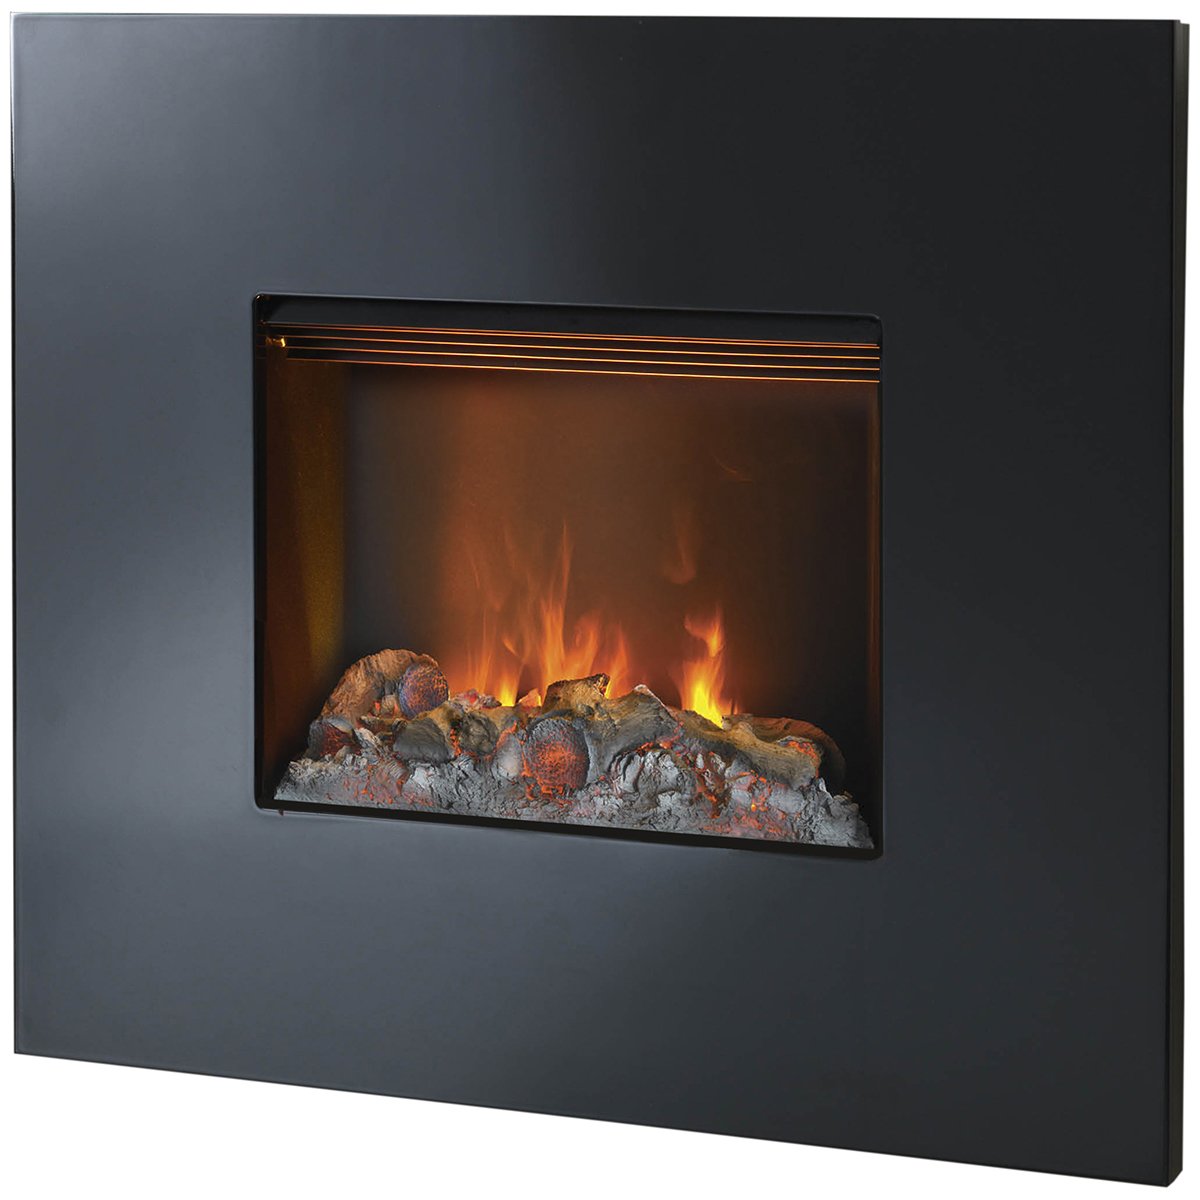 Dimplex Pemberley Wall Mounted Electric, Electric Wall Mounted Fireplace Australia